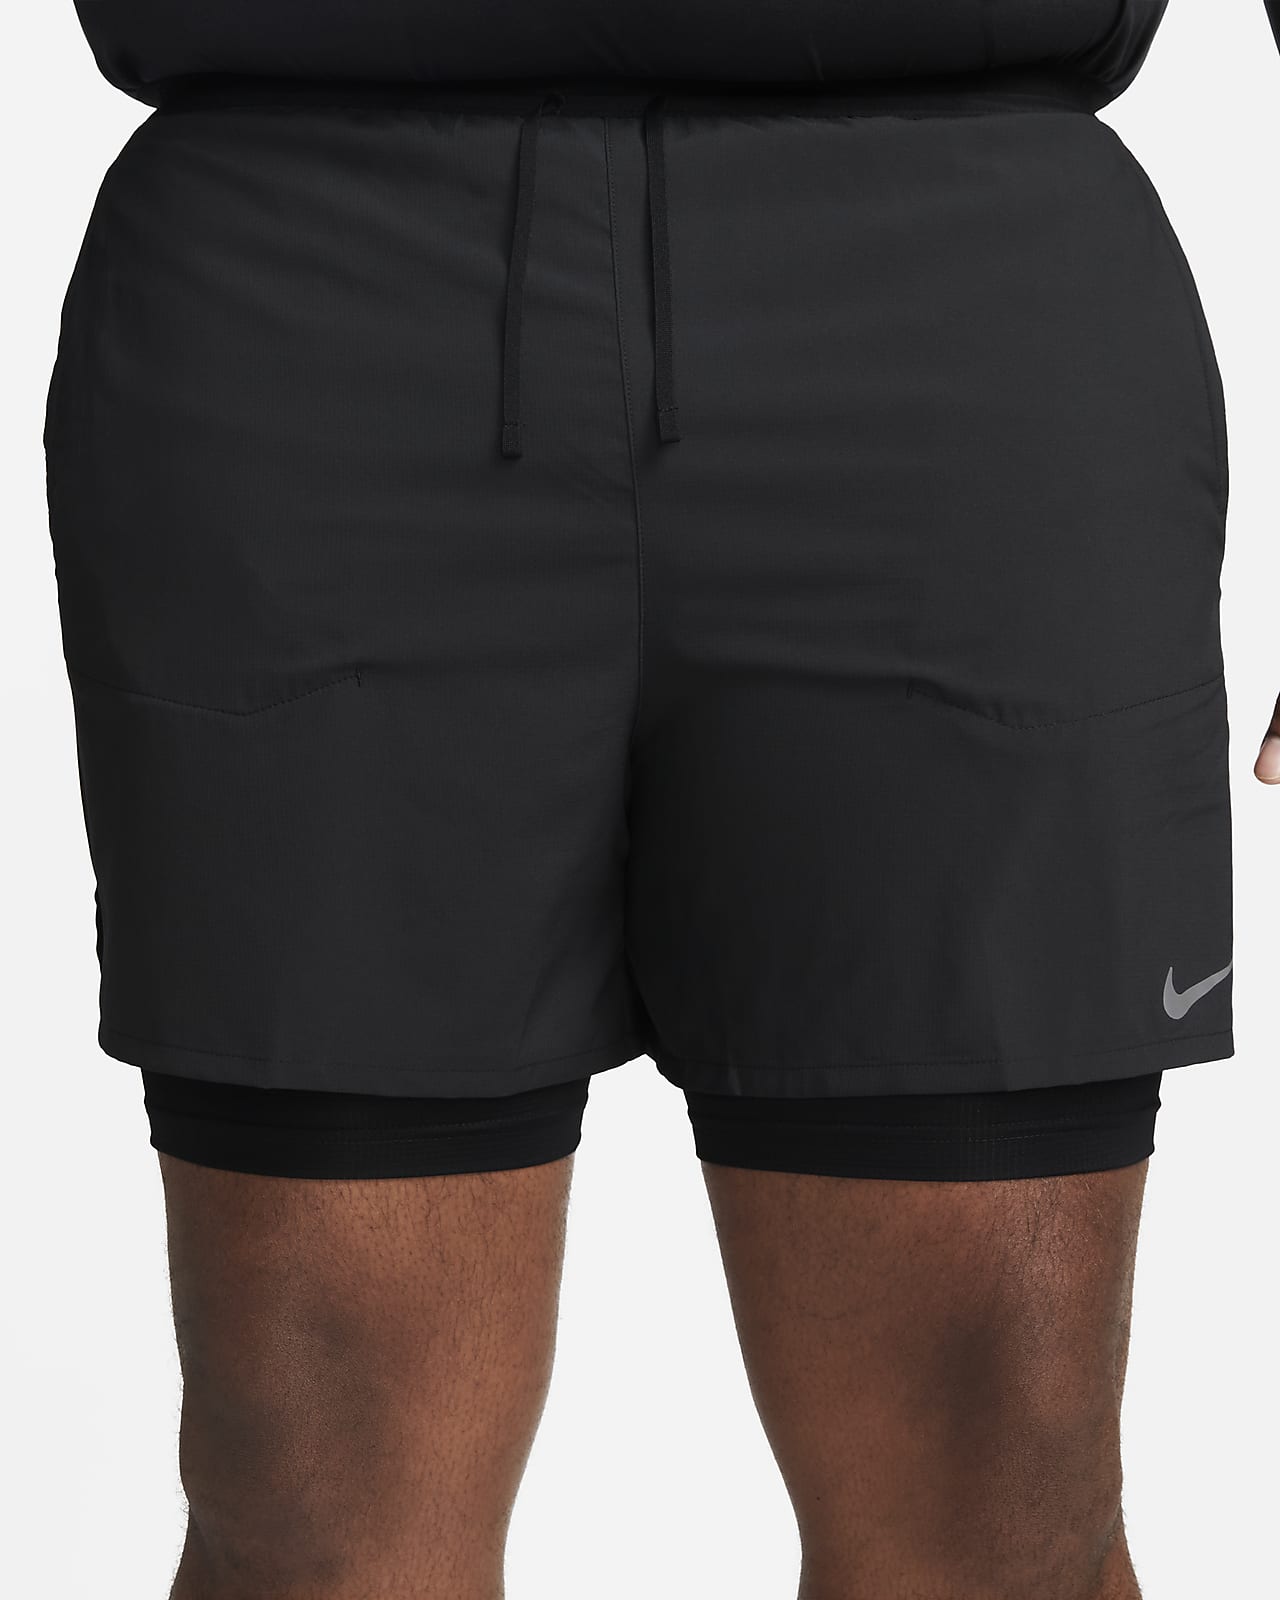 Limitless 2-In-1 Shorts – Charcoal And Black – ciirc